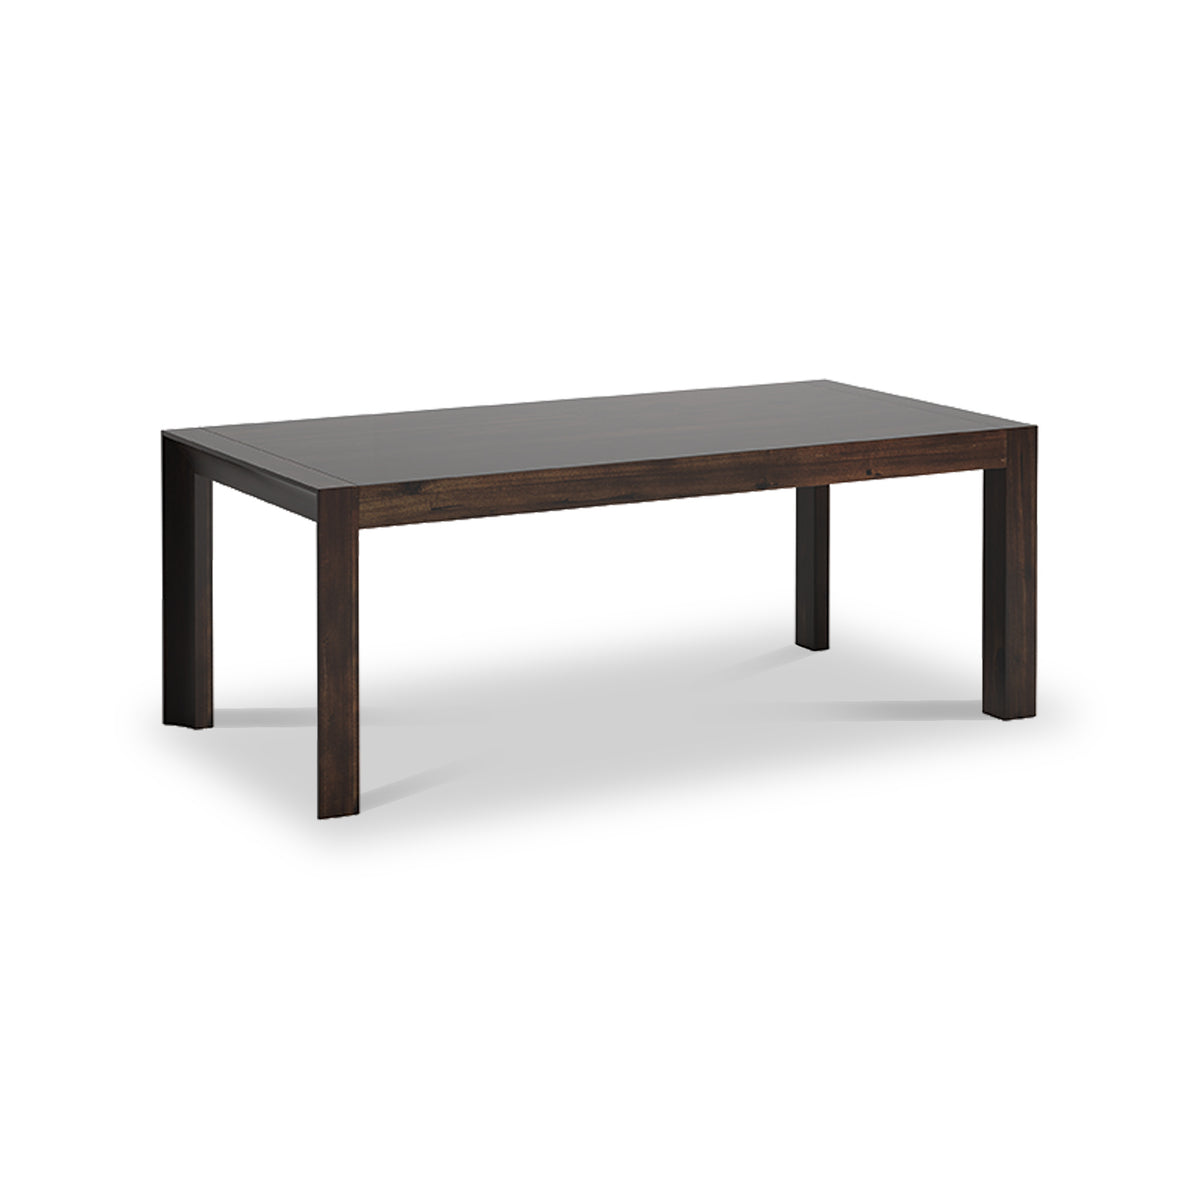 Elton 200cm Dining Table from Roseland Furniture